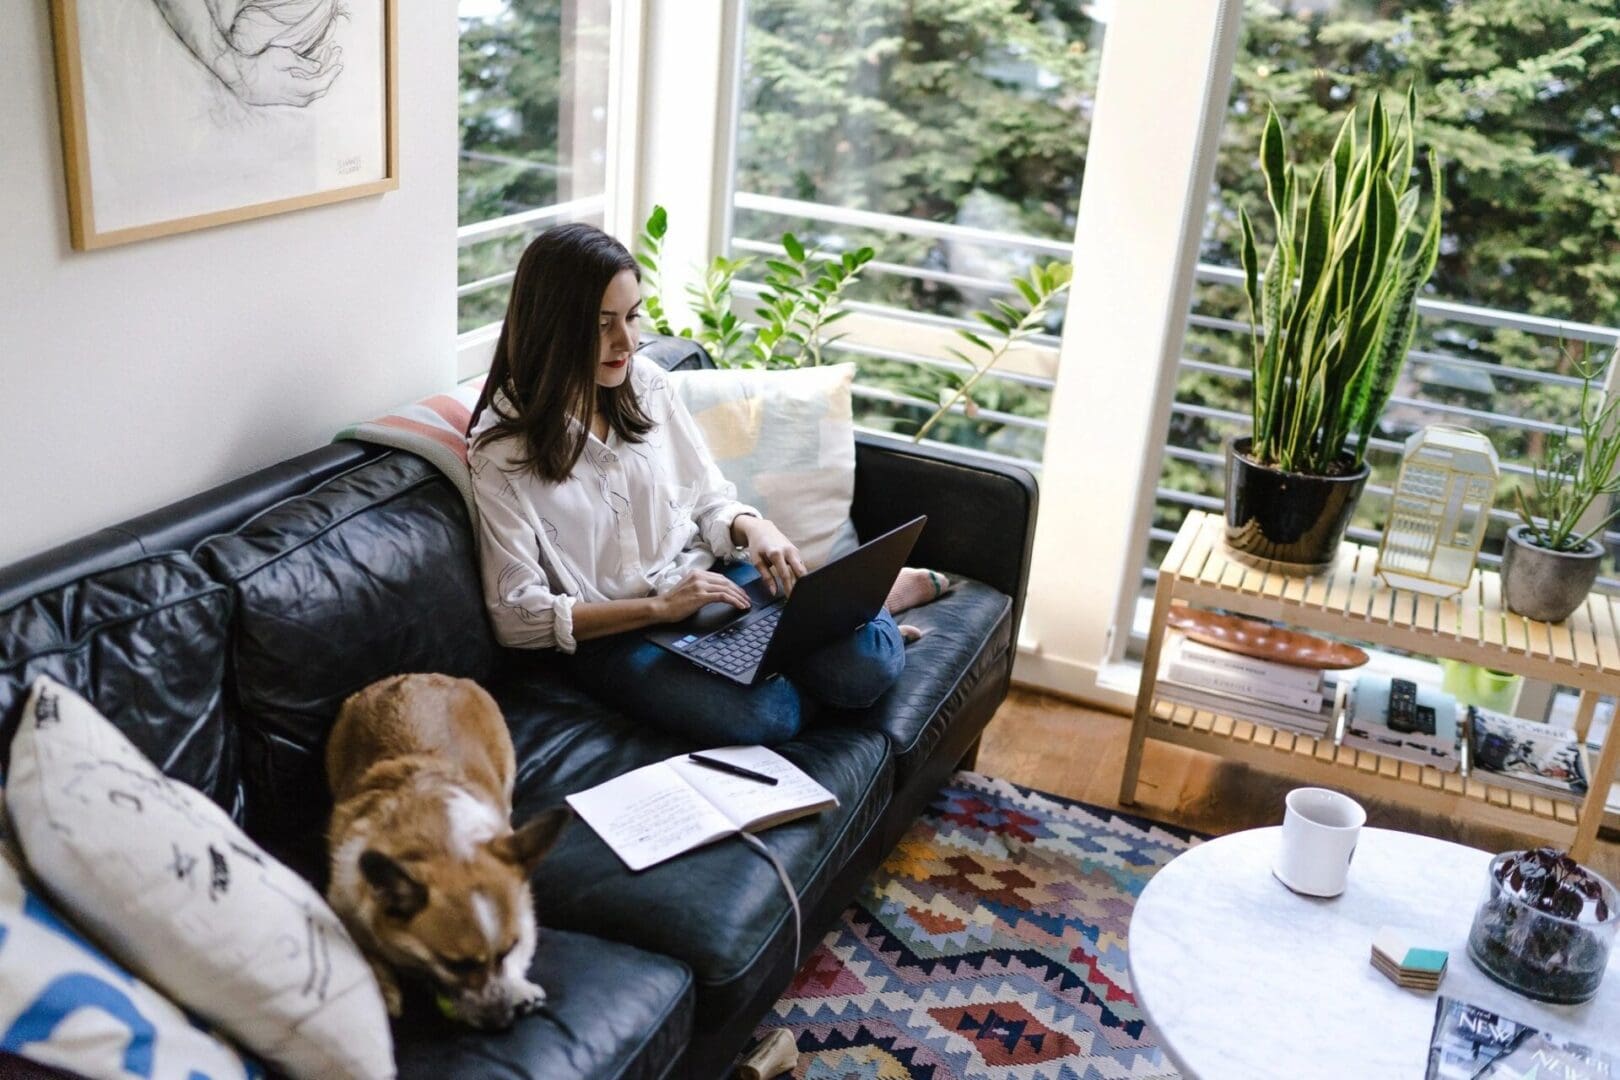 A woman sitting on a couch with her dog and laptop.